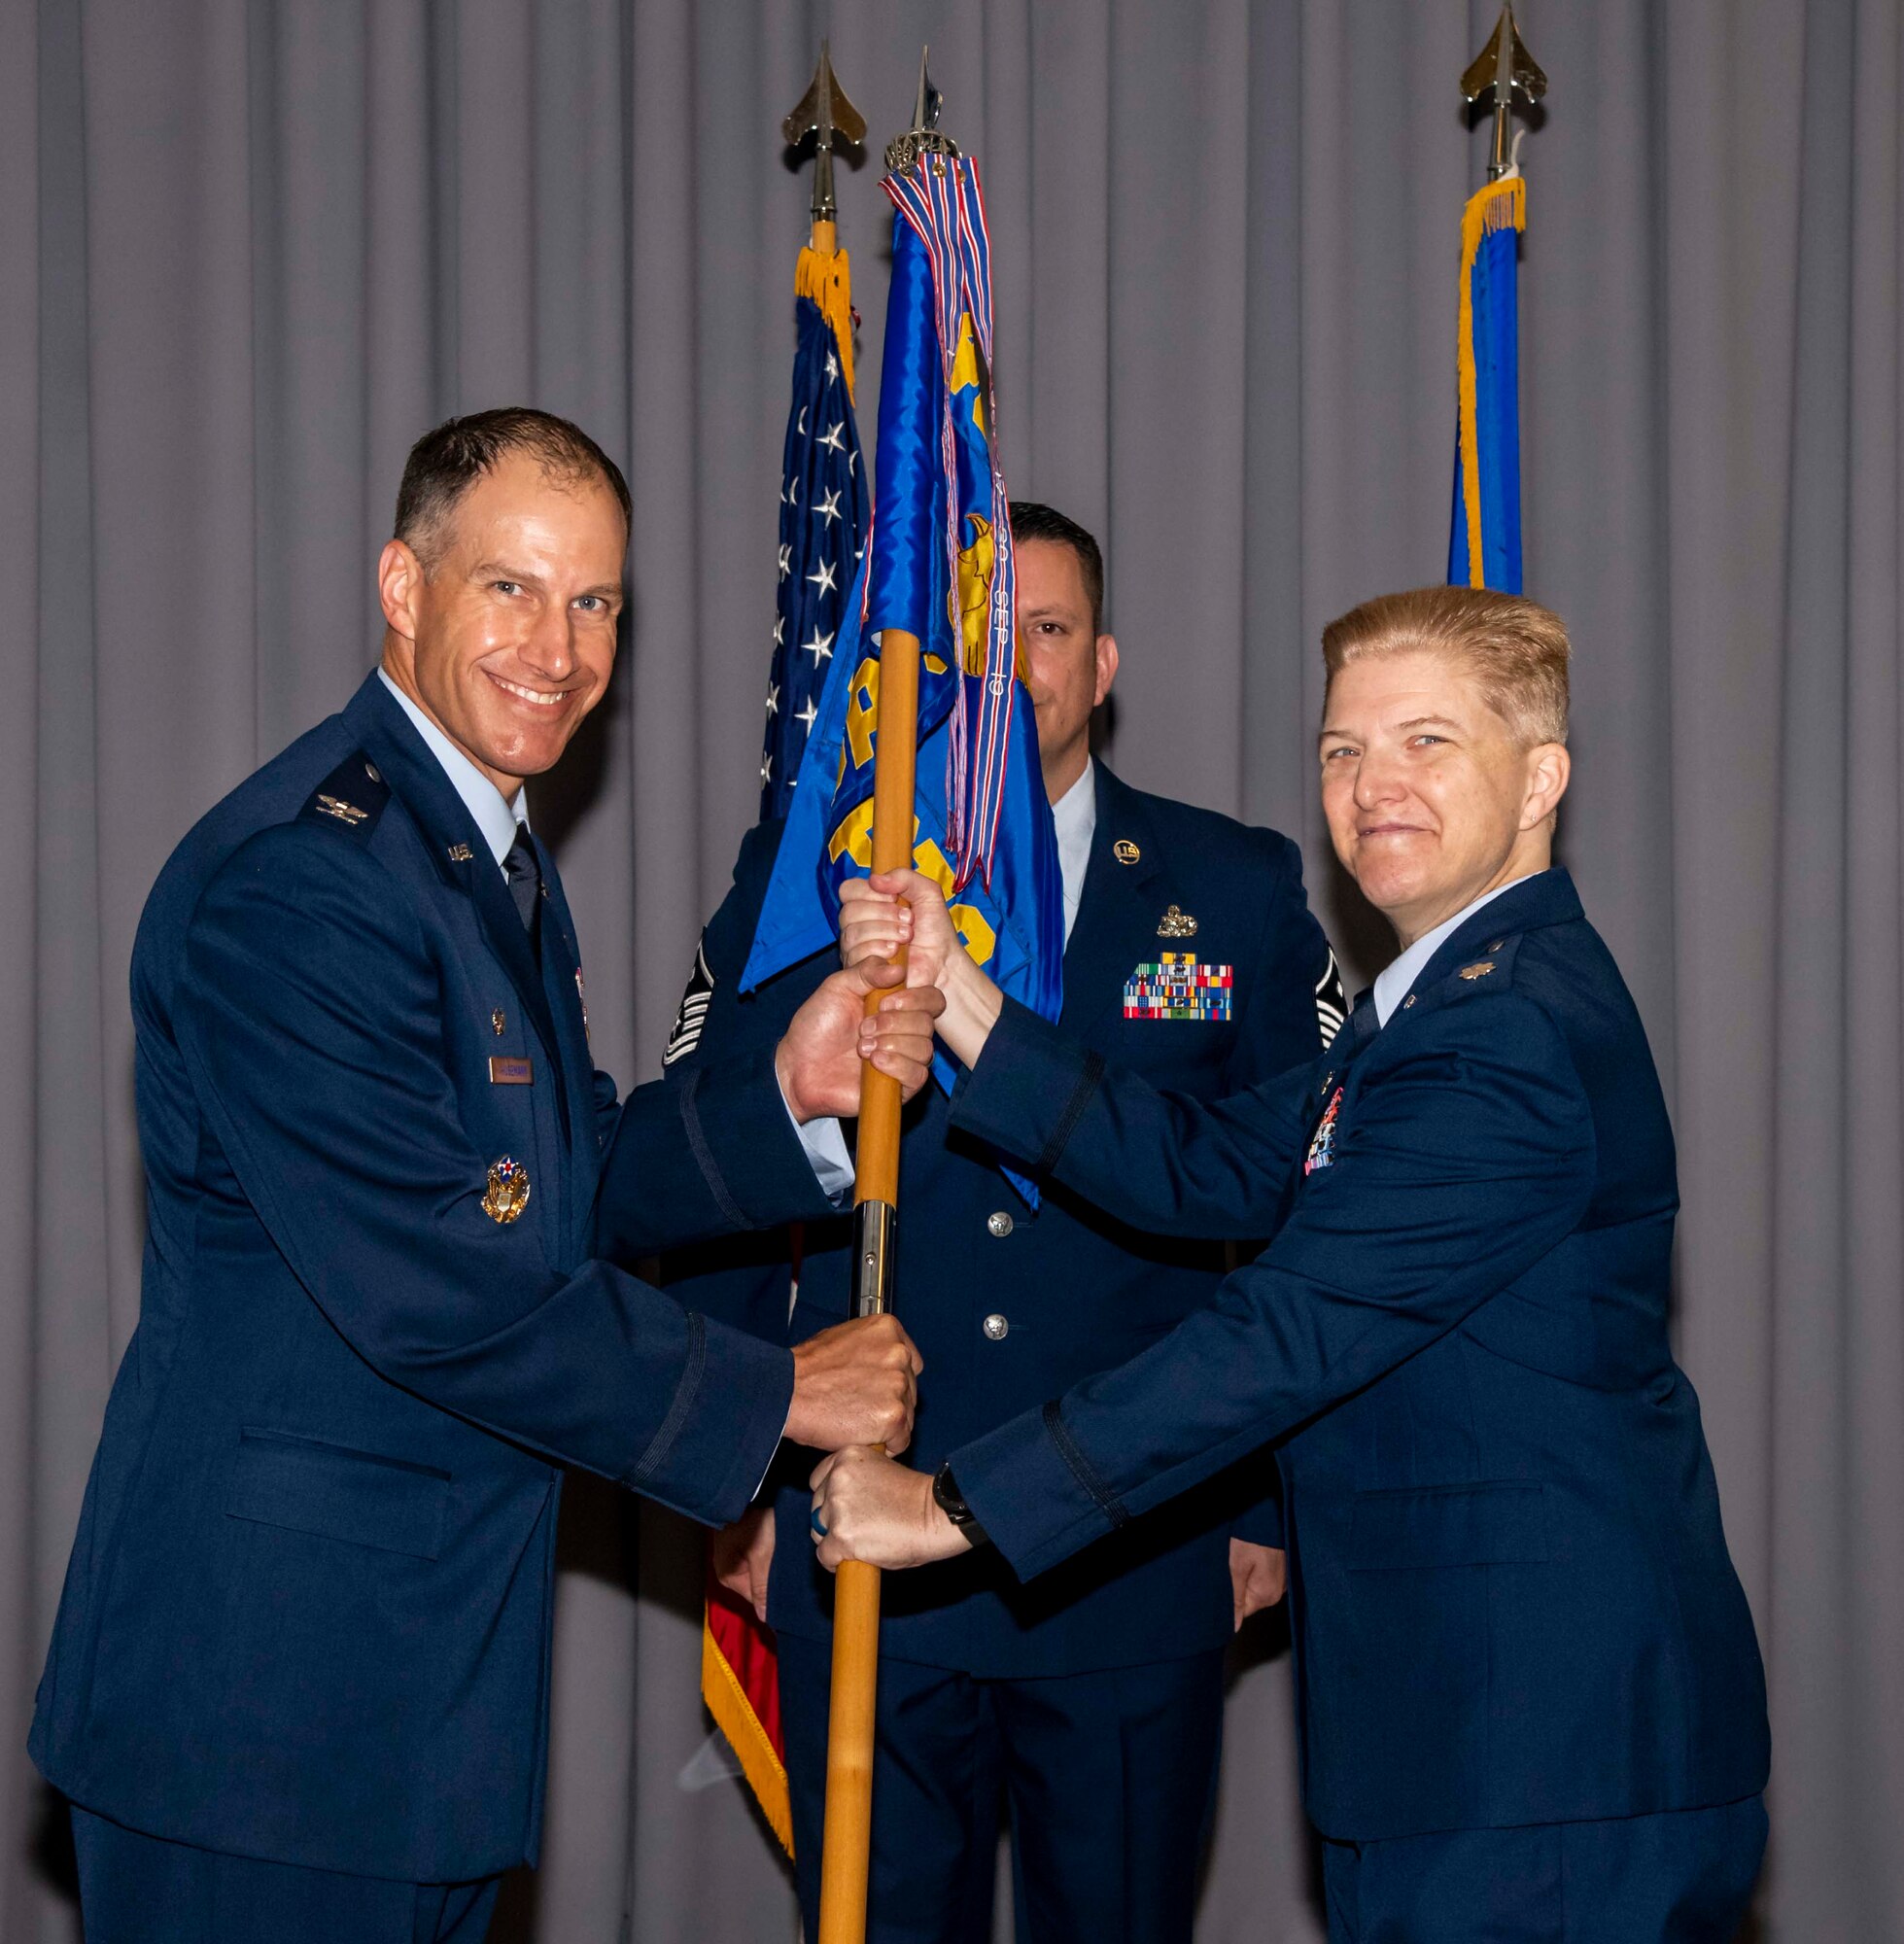 Col. Matt Husemann, left, 436th Airlift Wing commander, passes the guidon to Lt. Col. Gretchen Lewis during a change of command ceremony on Dover Air Force Base, Delaware, June 28, 2021. The ceremony saw Maj. Kevin Byram relinquish command to Lewis. (U.S. Air Force photo by Airman 1st Class Stephani Barge)